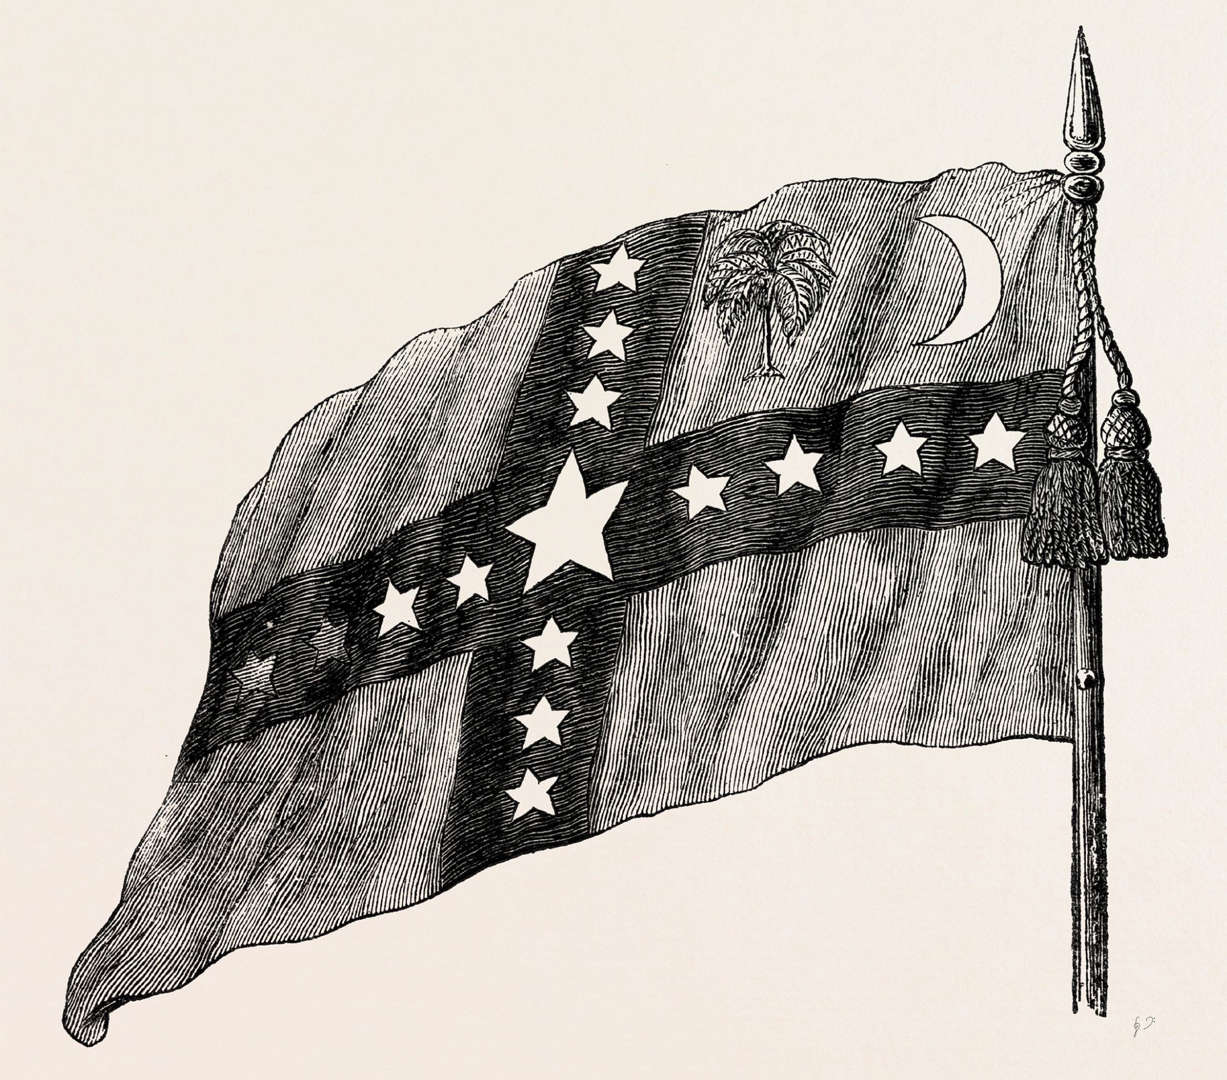 Circa 1970s engraving of the post-Civil War South Carolina state flag, showing the influence of the Confederate battle flag.